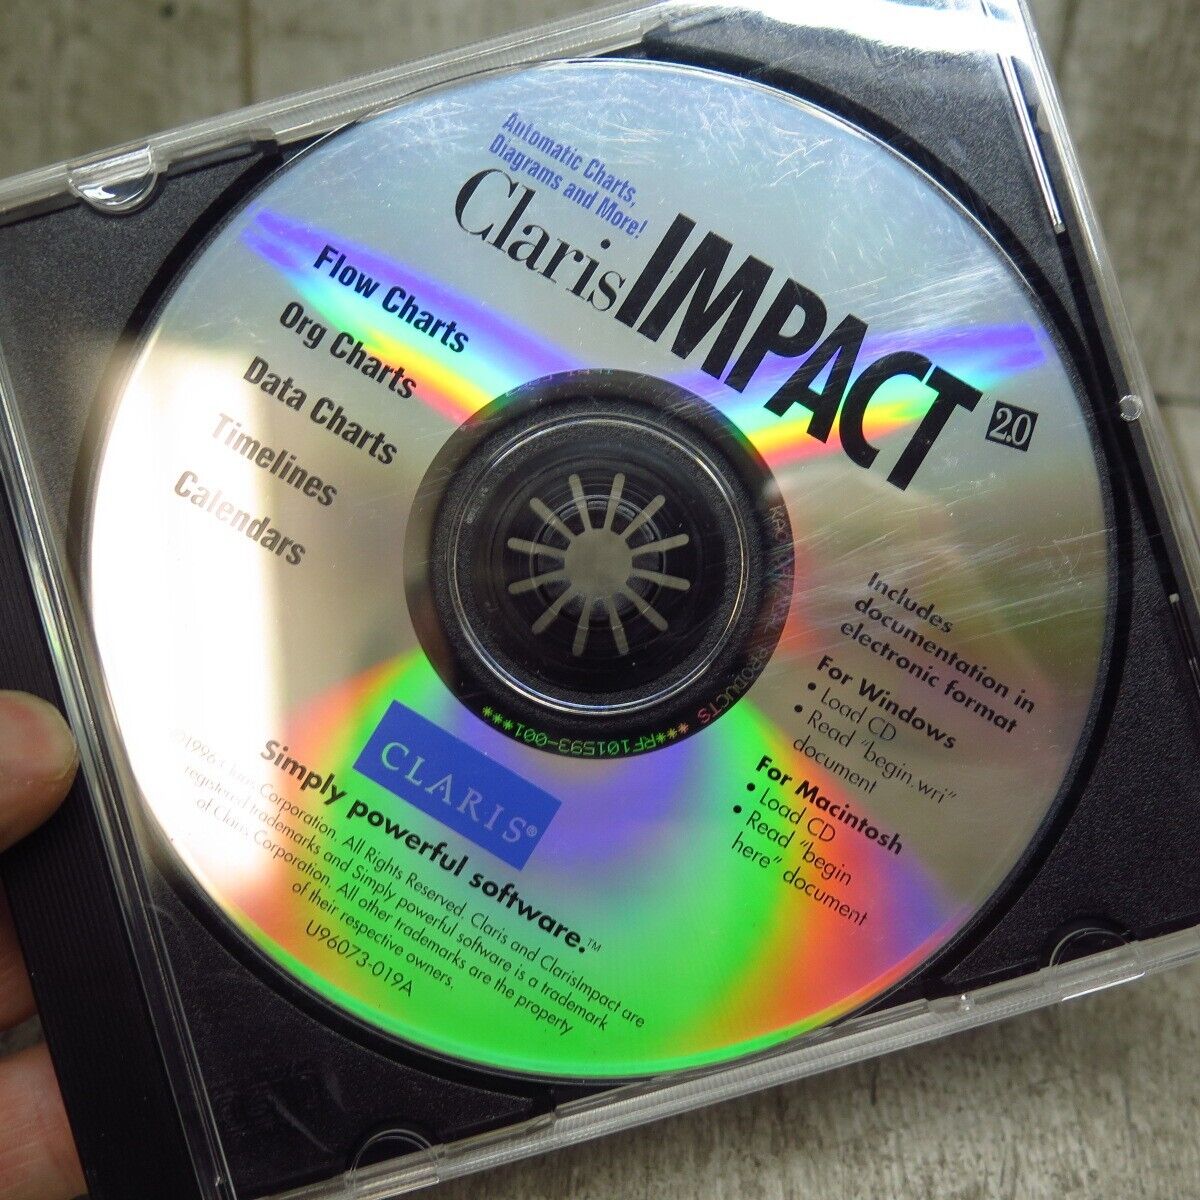 Vintage 1996 Claris Impact 2.0 Software for Mac OS CD Rom Disc